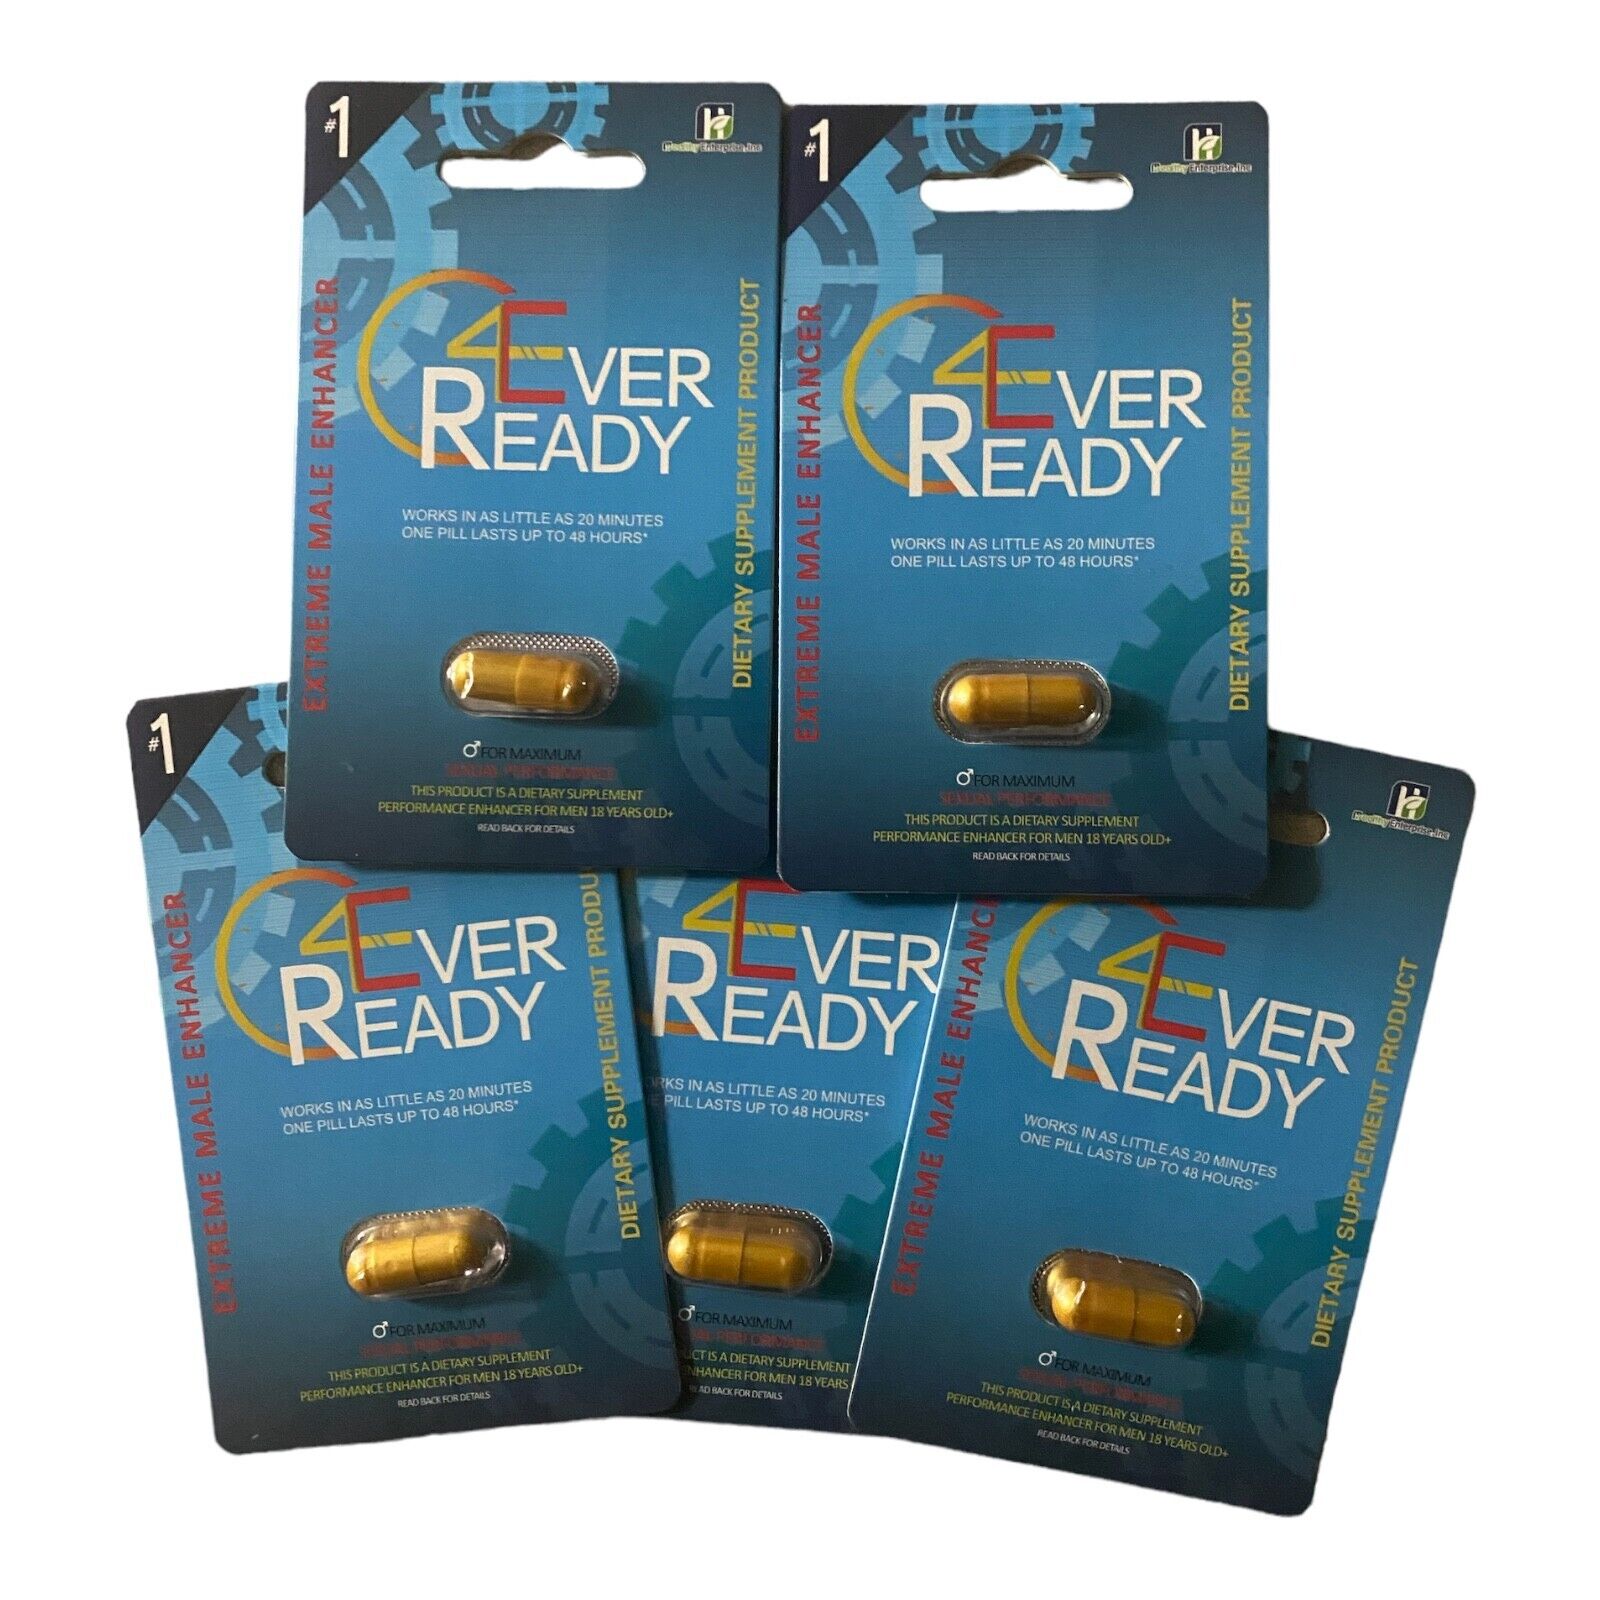 4Ever Ready  Male Endurance and Energy support supplement Pills 5ct